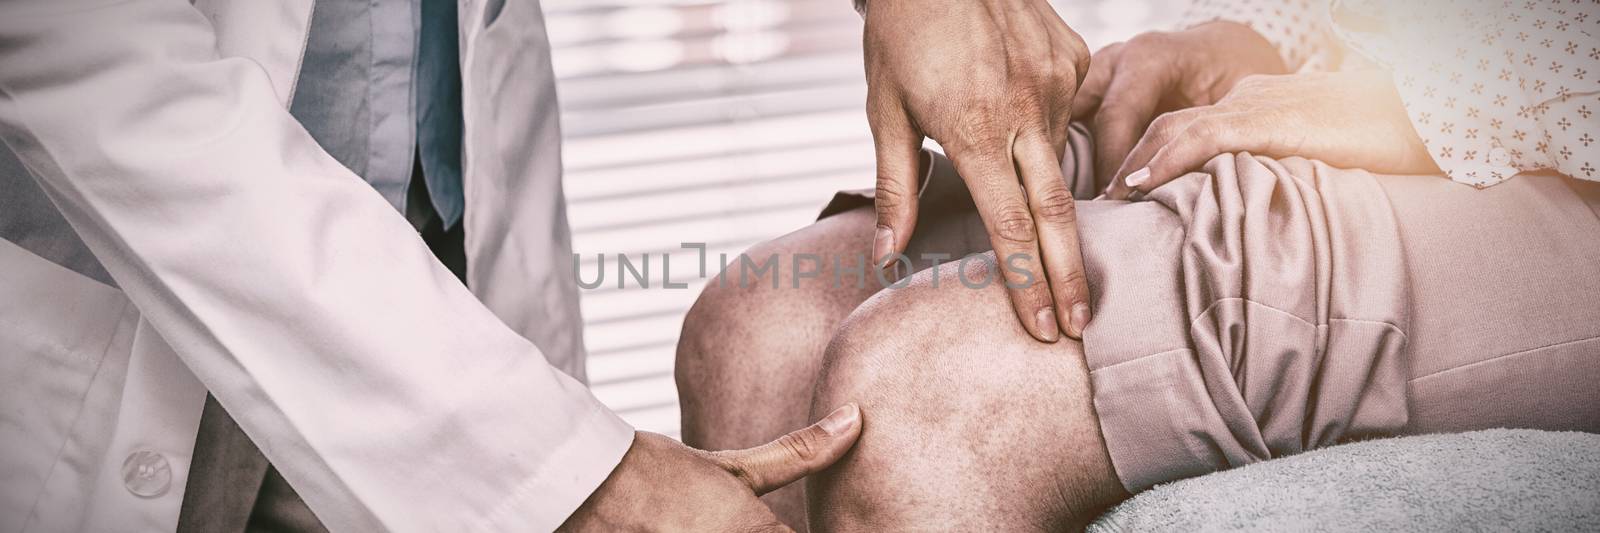 Mid section of doctor examining patient knee in clinic